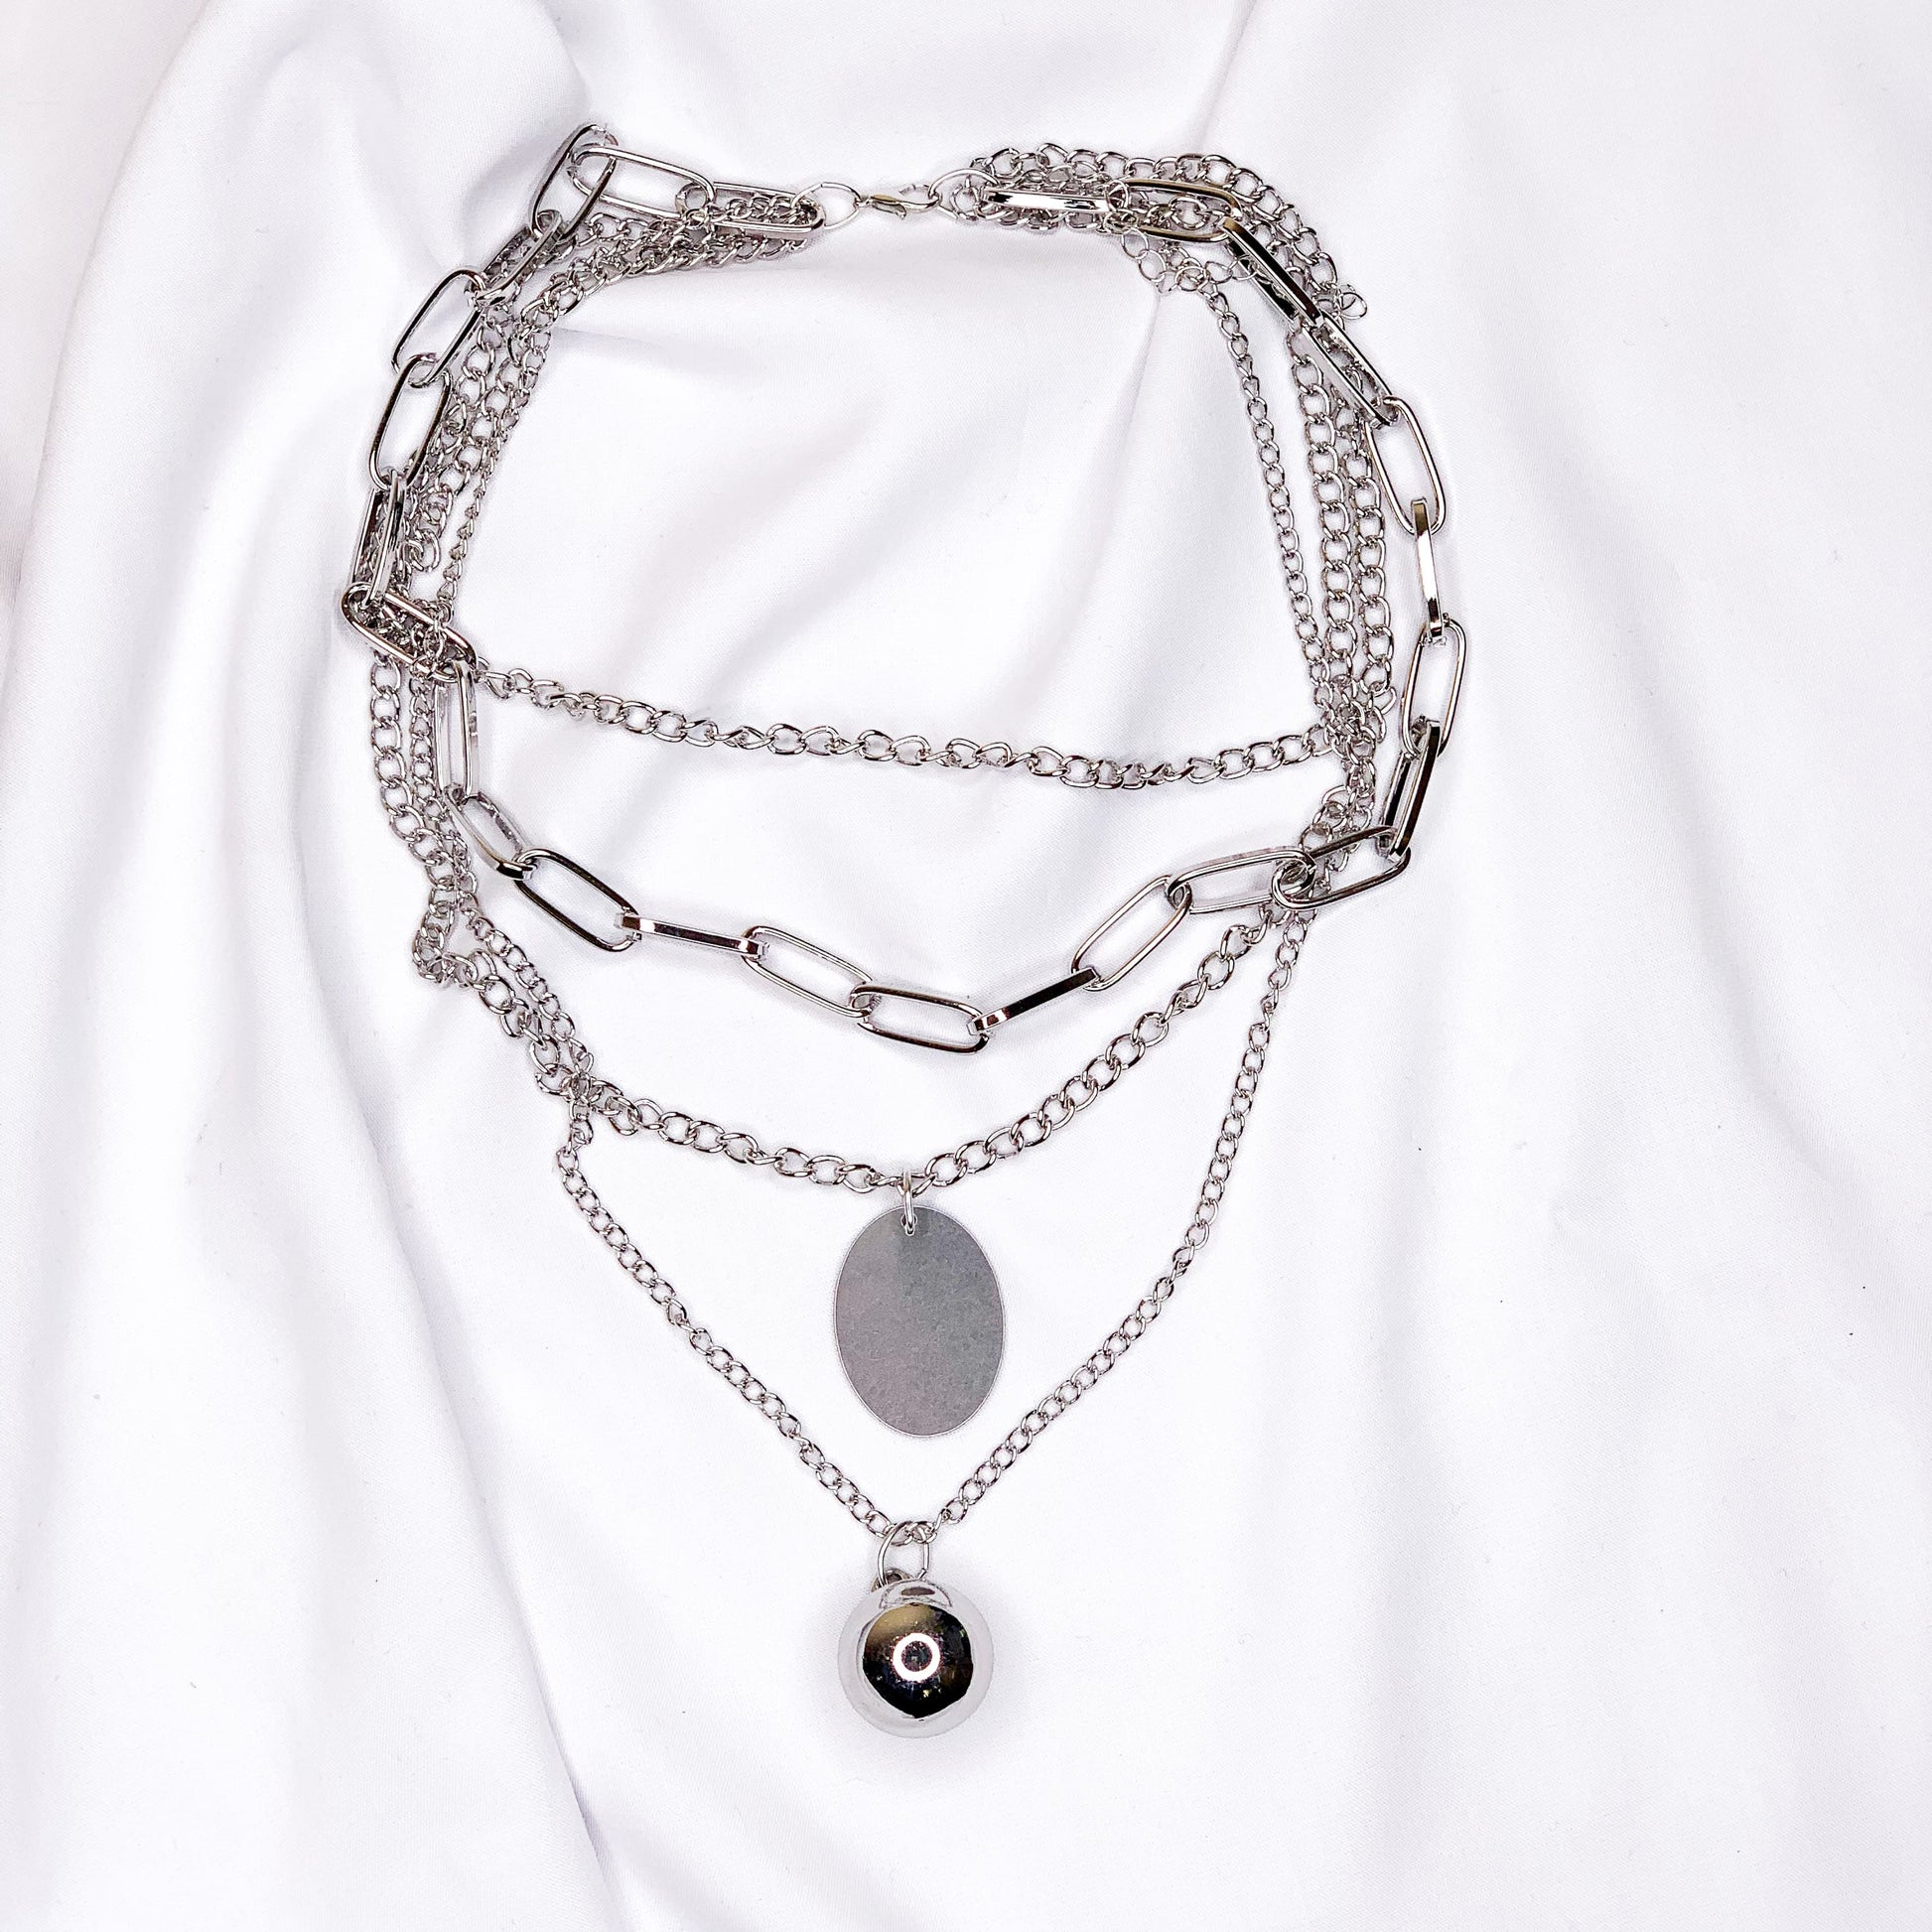 Hellen.V - Silver Necklace Chain 